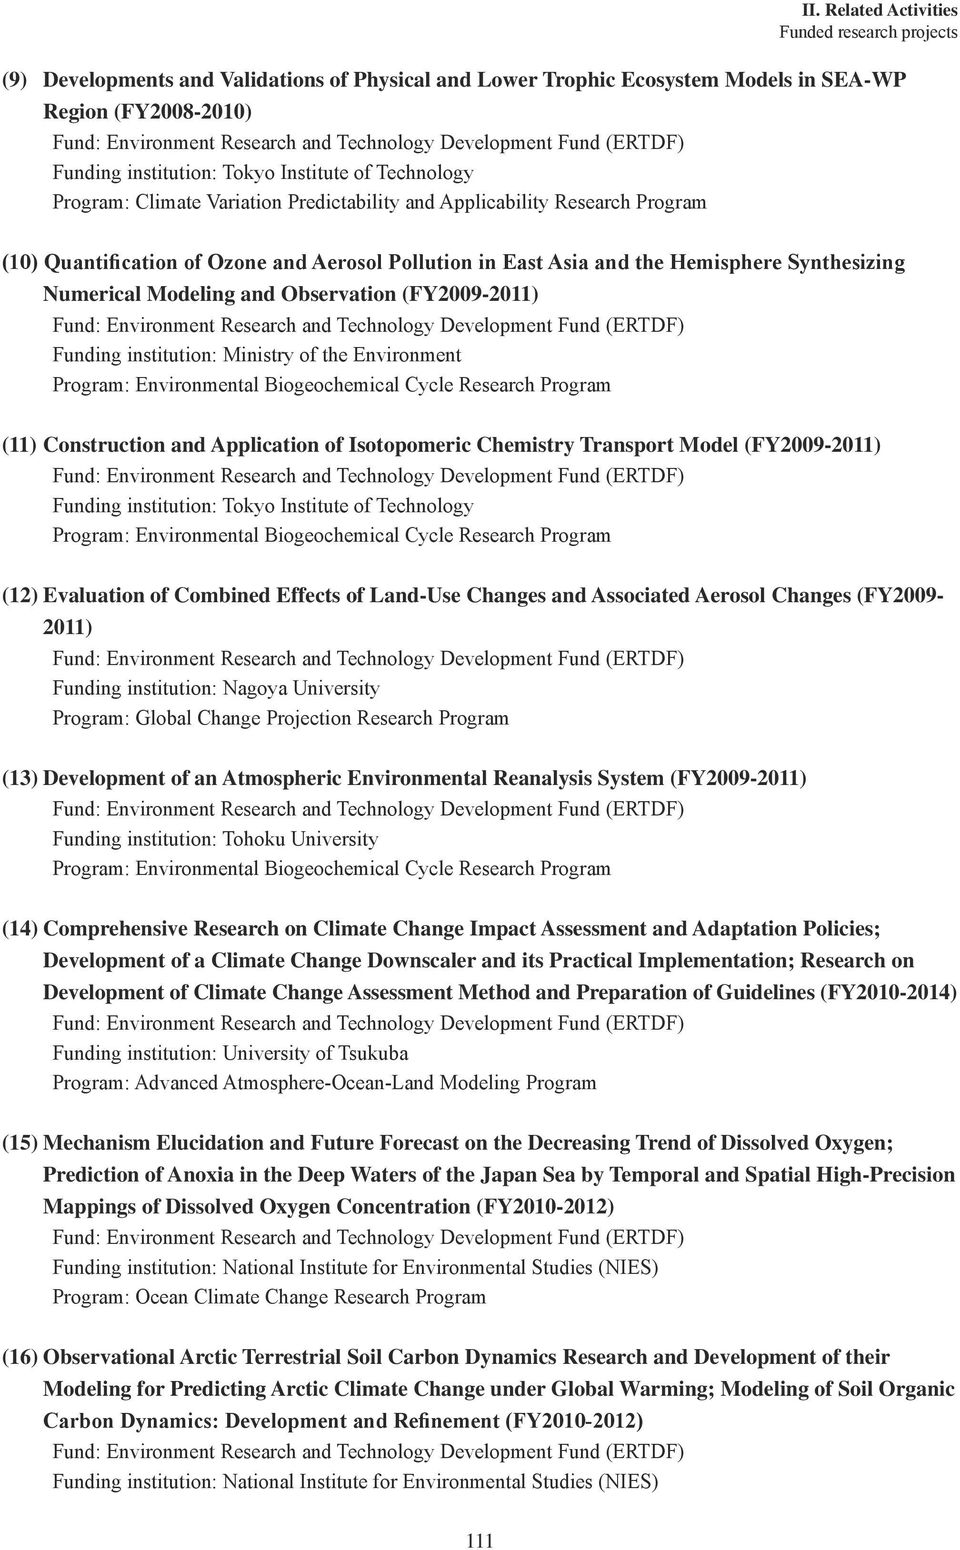 Funding institution: Ministry of the Environment (11) Construction and Application of Isotopomeric Chemistry Transport Model (FY2009-2011) Funding institution: Tokyo Institute of Technology (12)